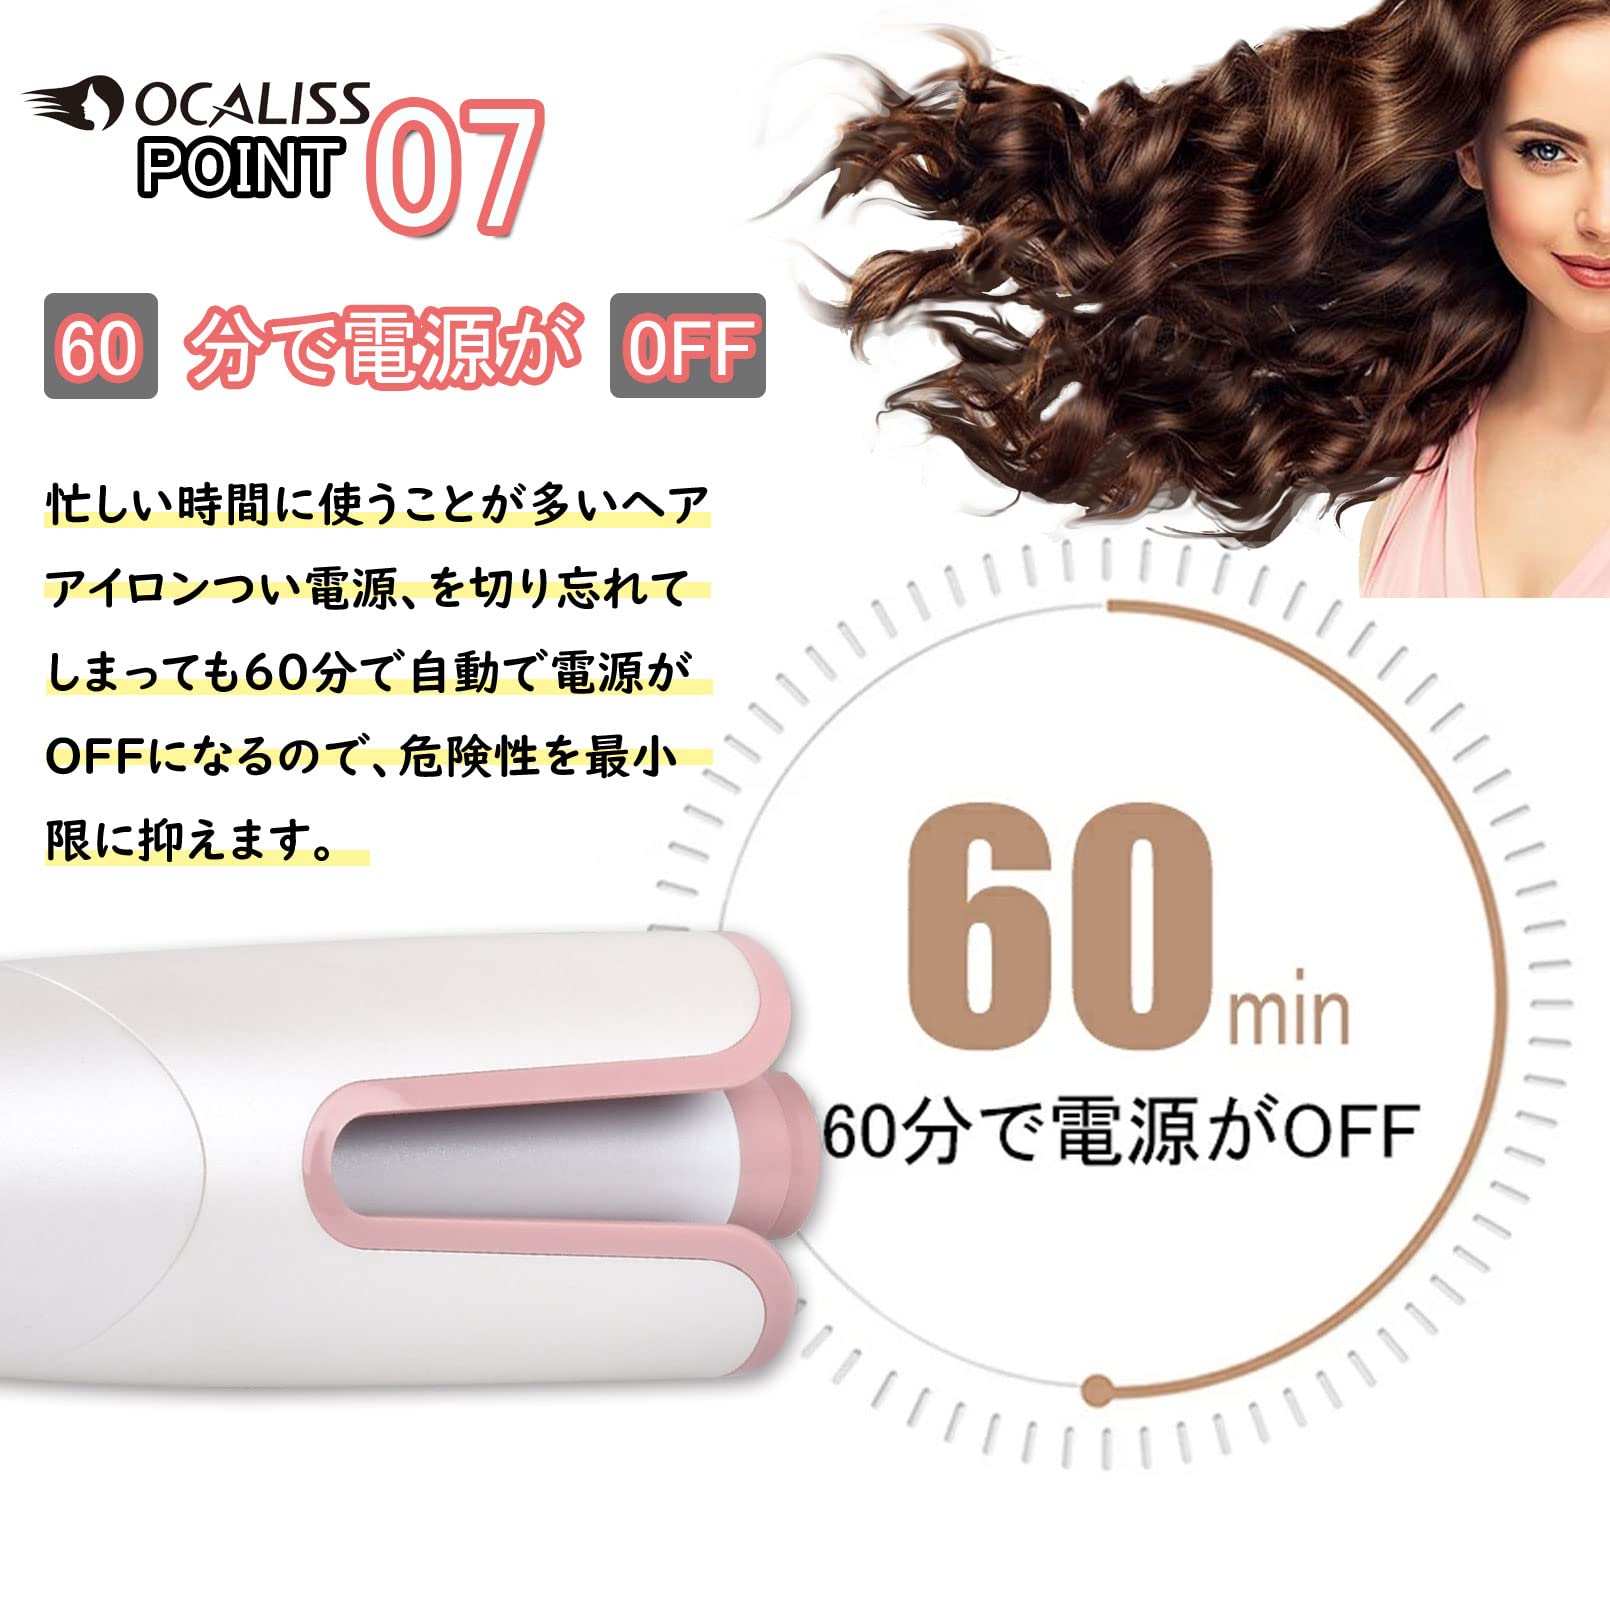 OCALISS Automatic Hair Iron, Auto Ceramic Hair Curler, Prevents Burns, 3 Temperature Settings, 392/392°F (150/180/210°C), Rapid Heating, 2 Curl Directions, Automatic Shut-Off, PSE Certified, Home and Travel